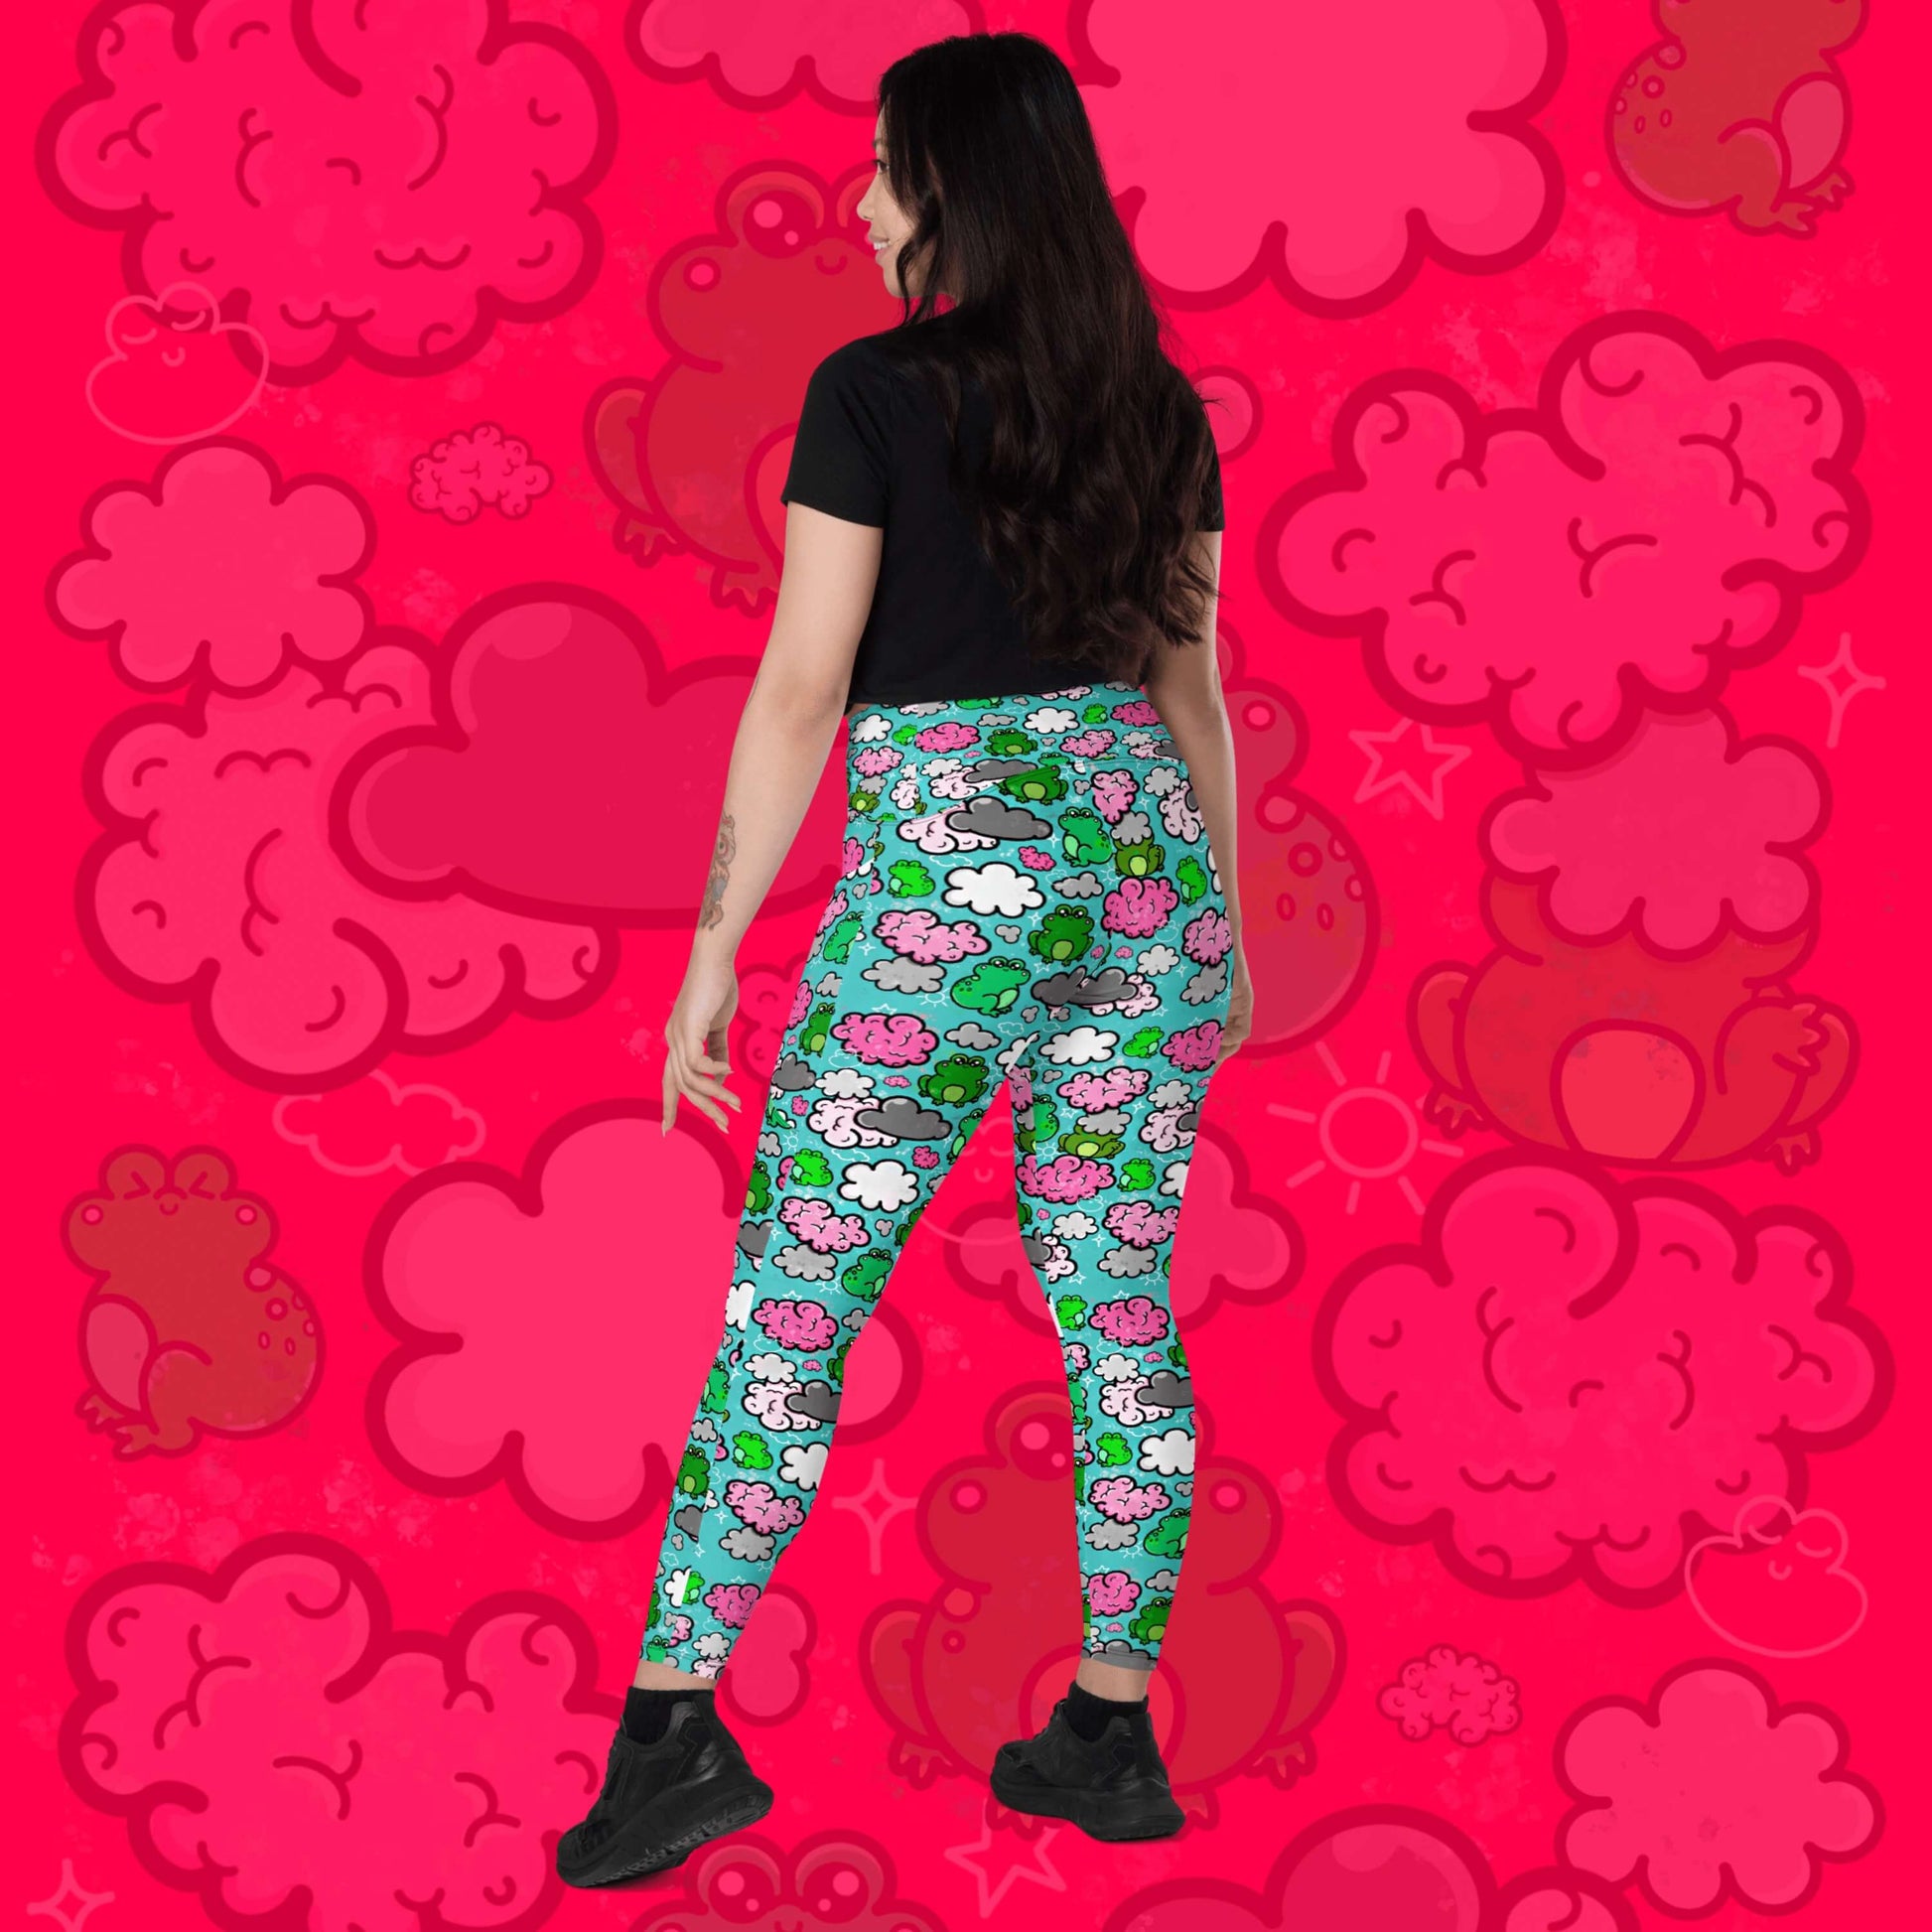 The Brain Frog Leggings with pockets - Brain Fog being worn by a model facing away with one leg stretched out to the side and smiling looking slightly over their shoulder on a red background with a faded brain frog print. The leggings are an aqua blue base with various green kawaii face frogs with pink blush cheeks, pink brain style clouds, white and grey clouds and white sparkles all over. The design was created to raise awareness of Brain Fog.